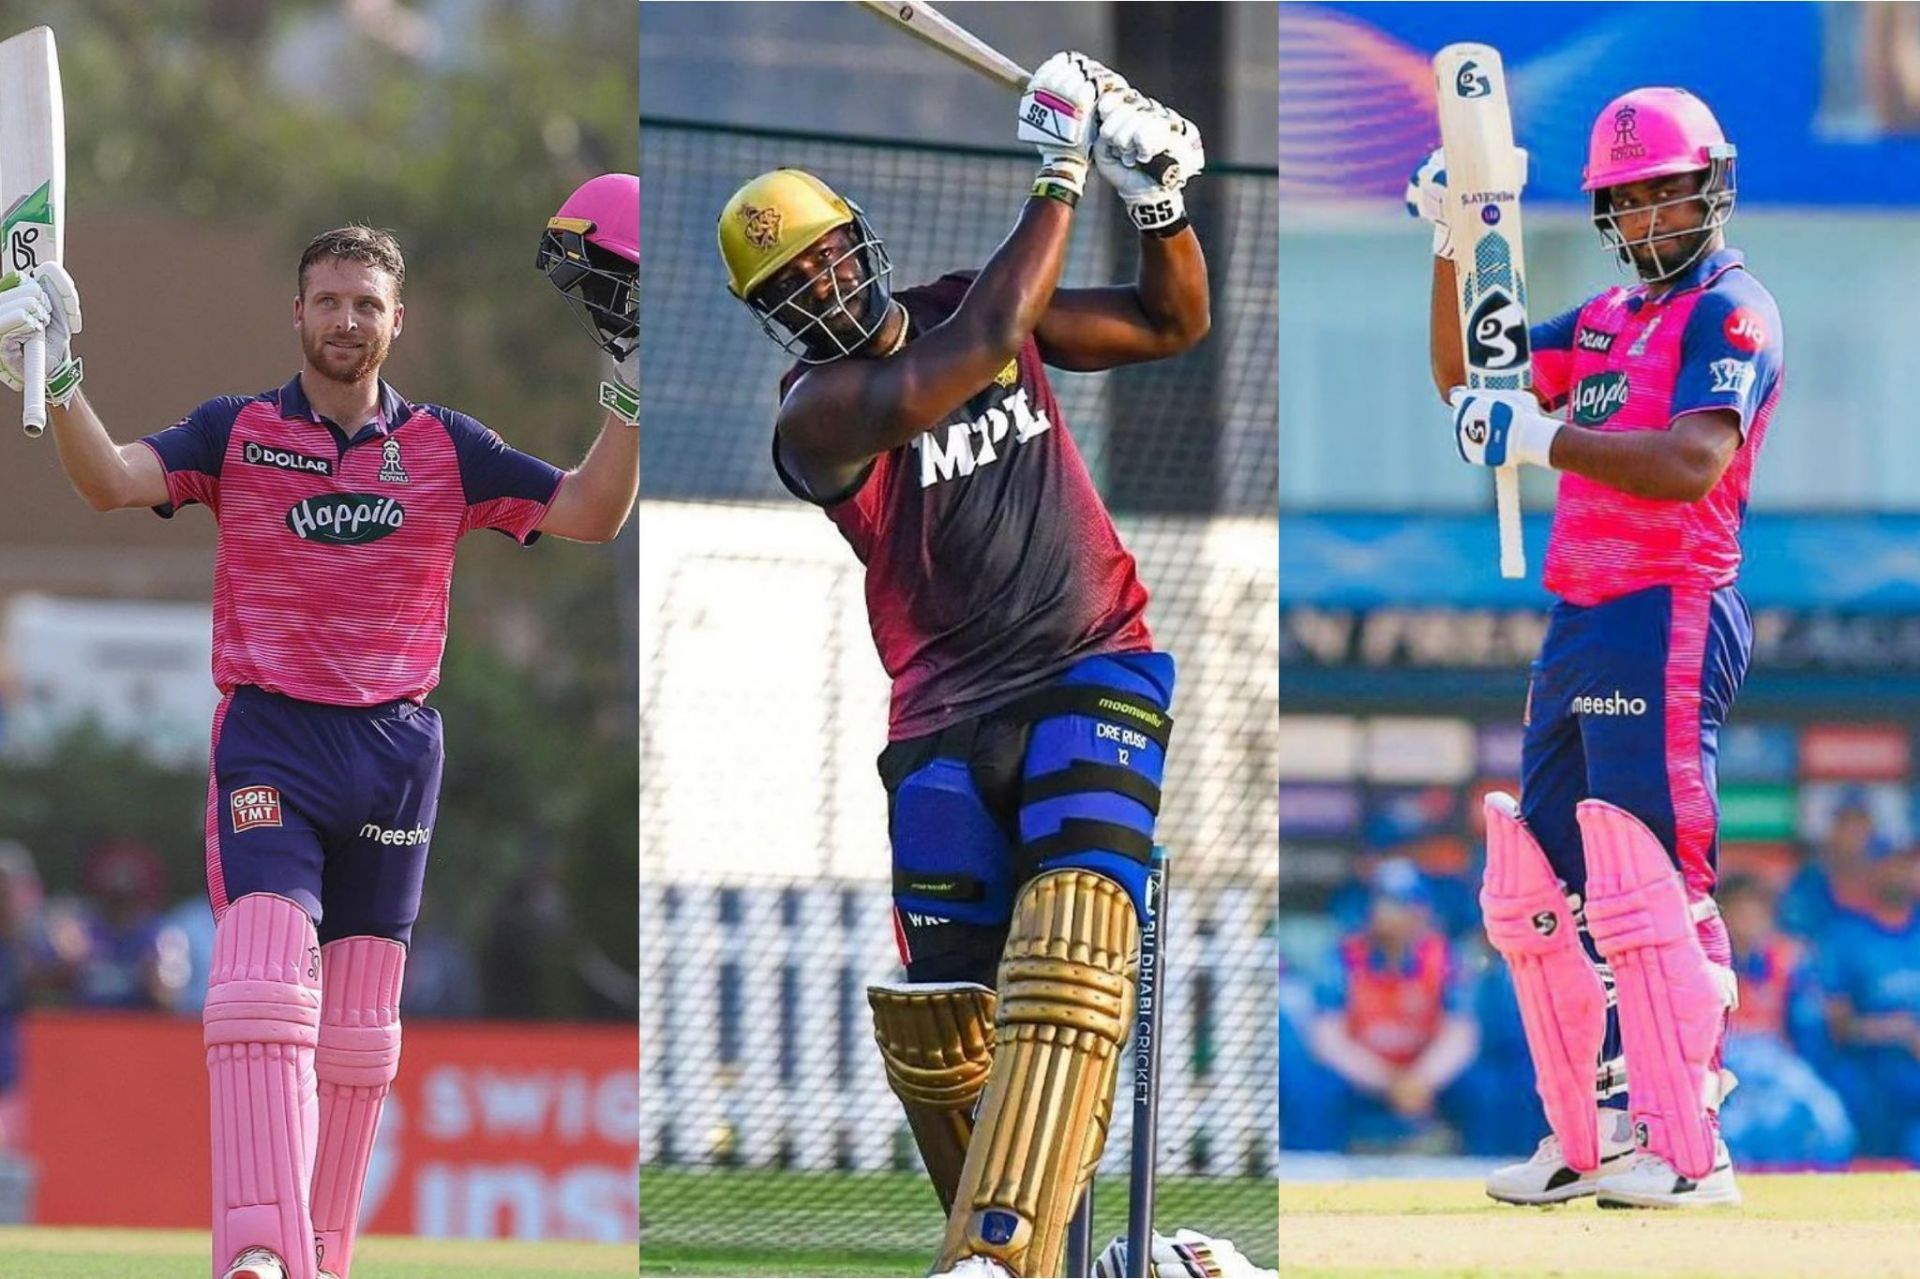 Match 30 of PL 2022 will feature the Rajasthan Royals and Kolkata Knight Riders